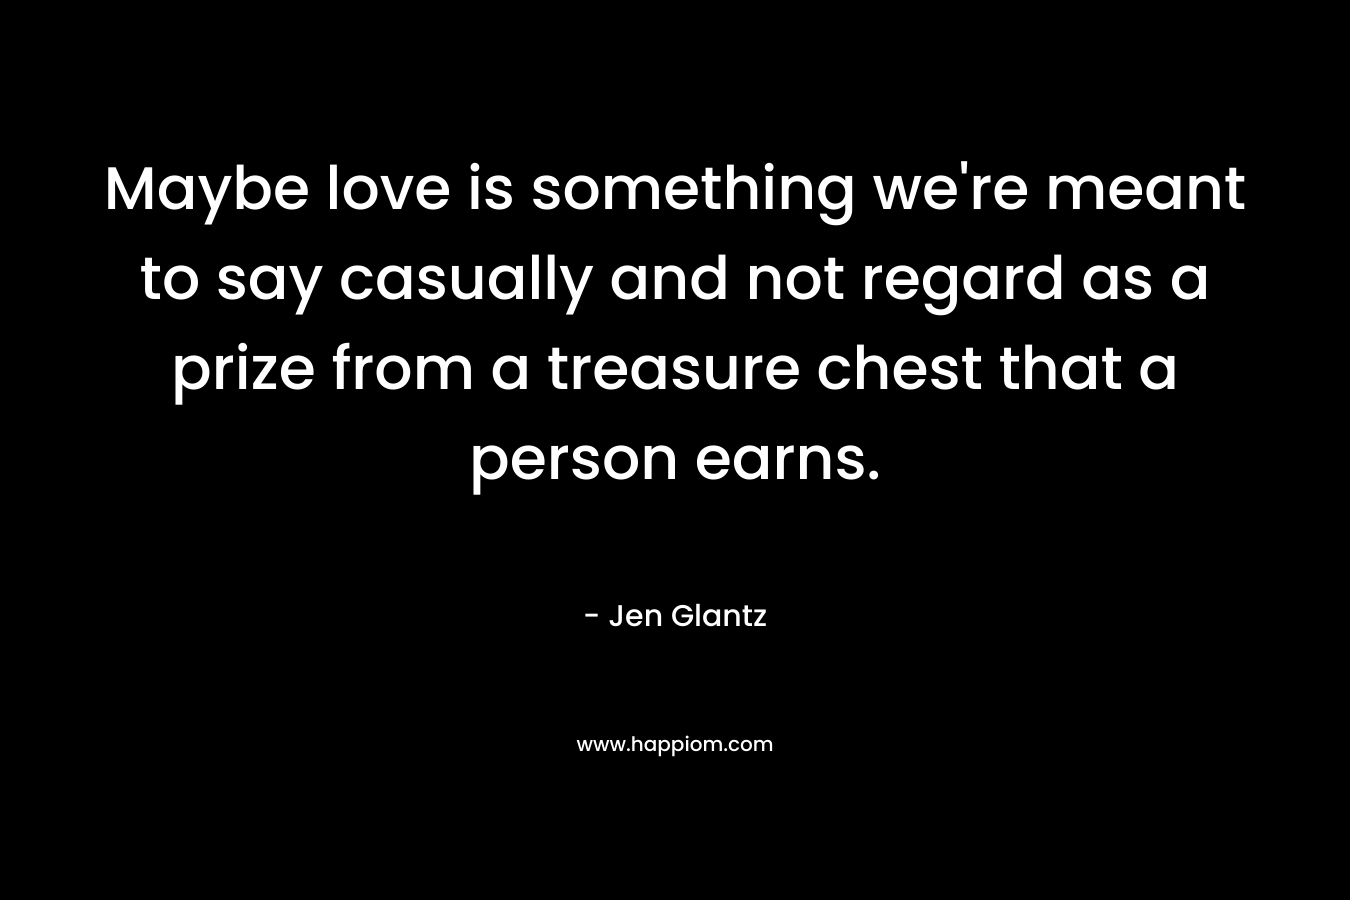 Maybe love is something we’re meant to say casually and not regard as a prize from a treasure chest that a person earns. – Jen Glantz